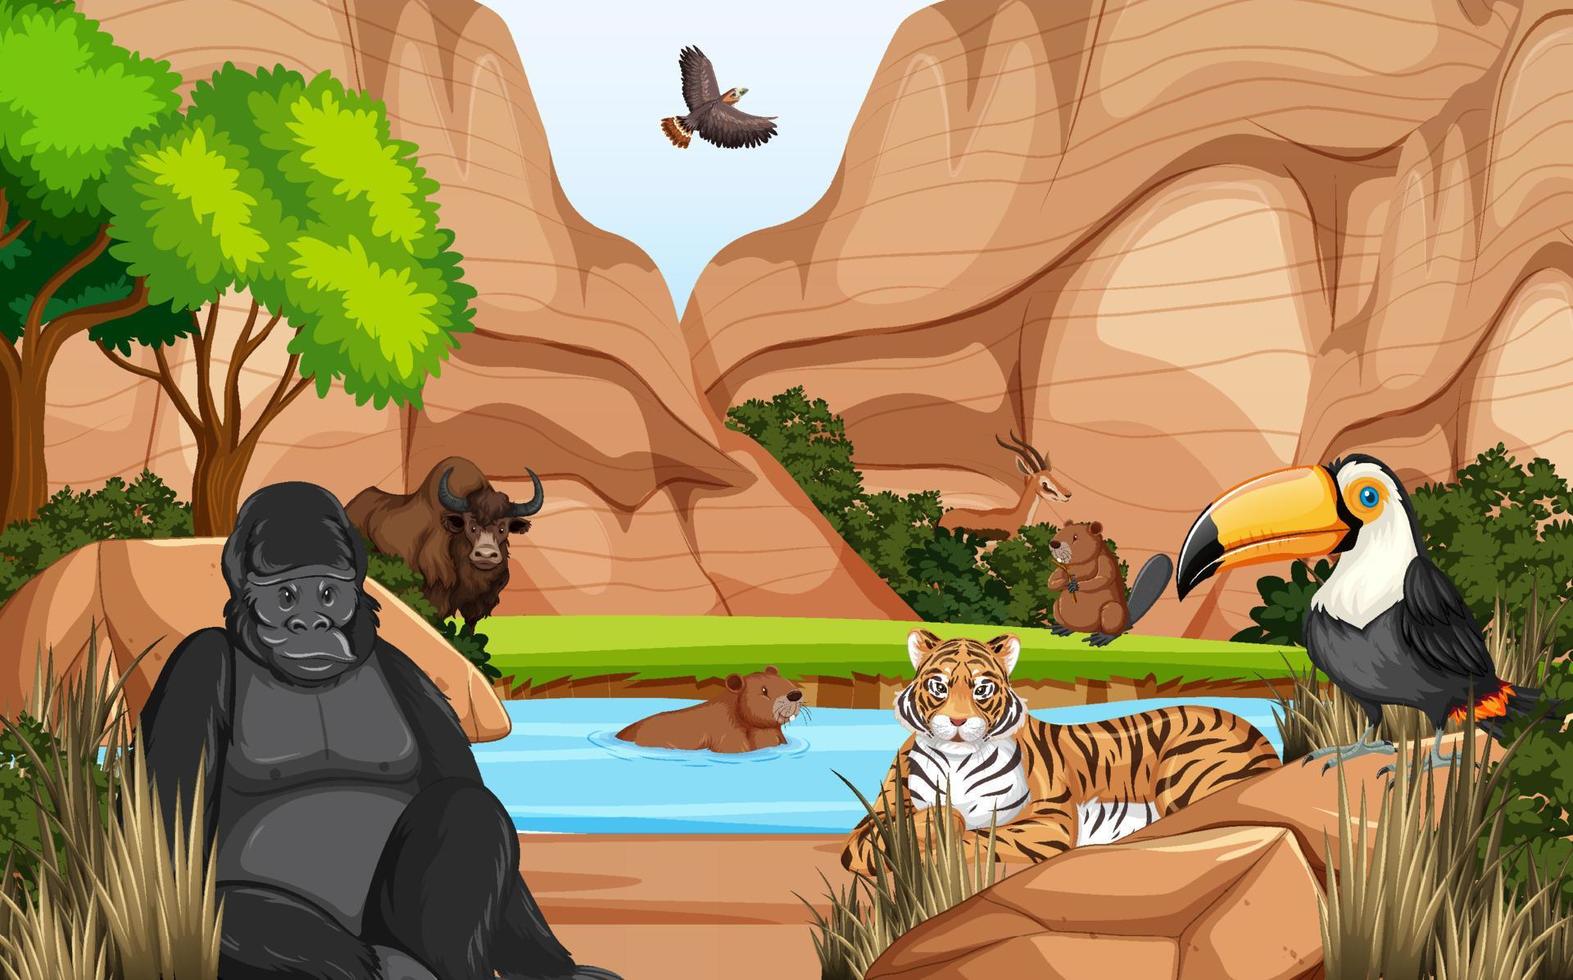 Dryland forest with animals vector